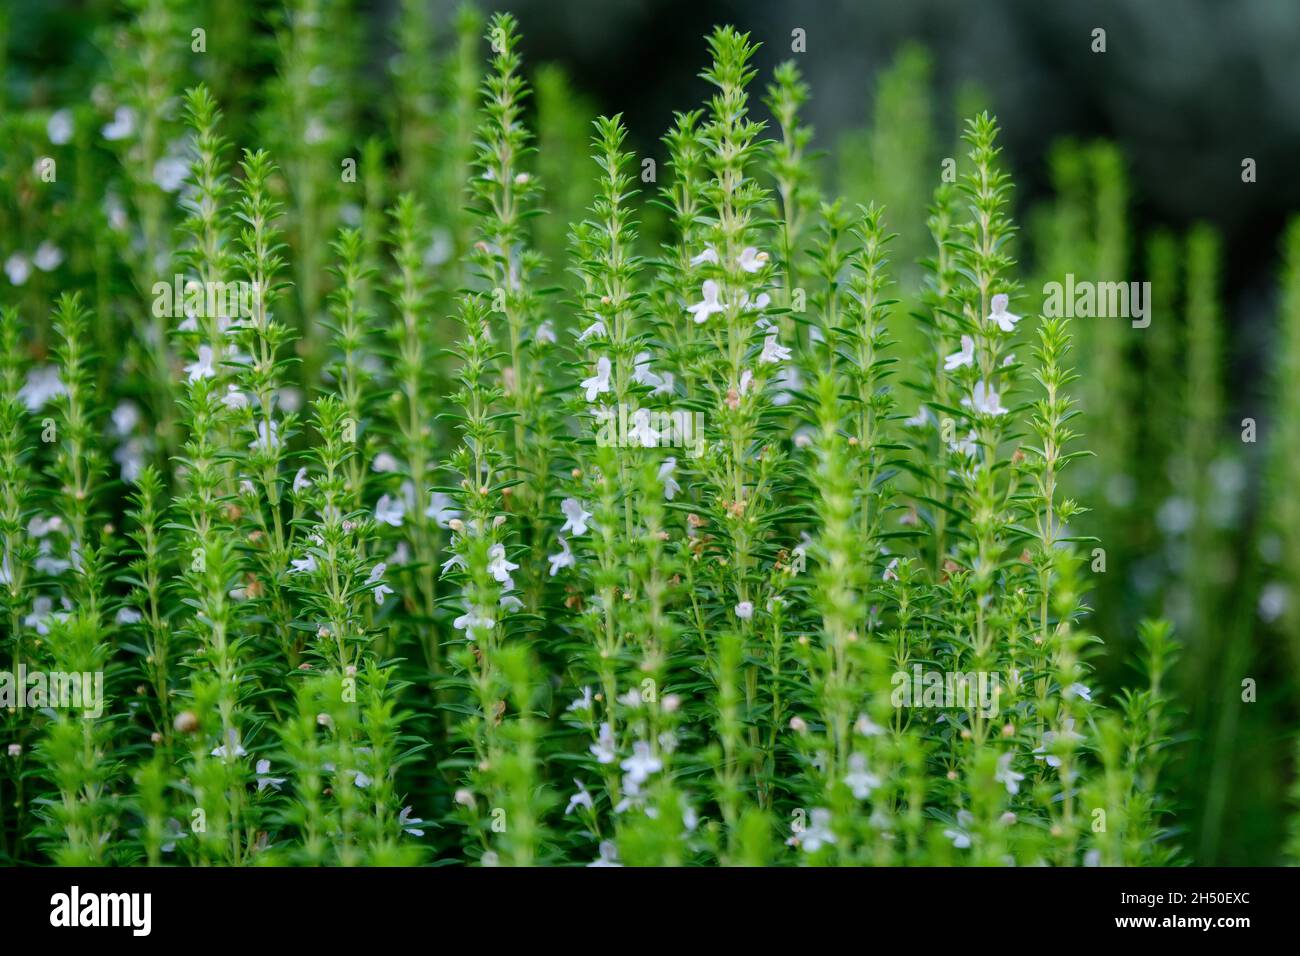 Many small green leaves and white flowers of Hyssopus officinalis plant, known as hyssop, in sunny summer garden, beautiful outdoor monochrome backgro Stock Photo